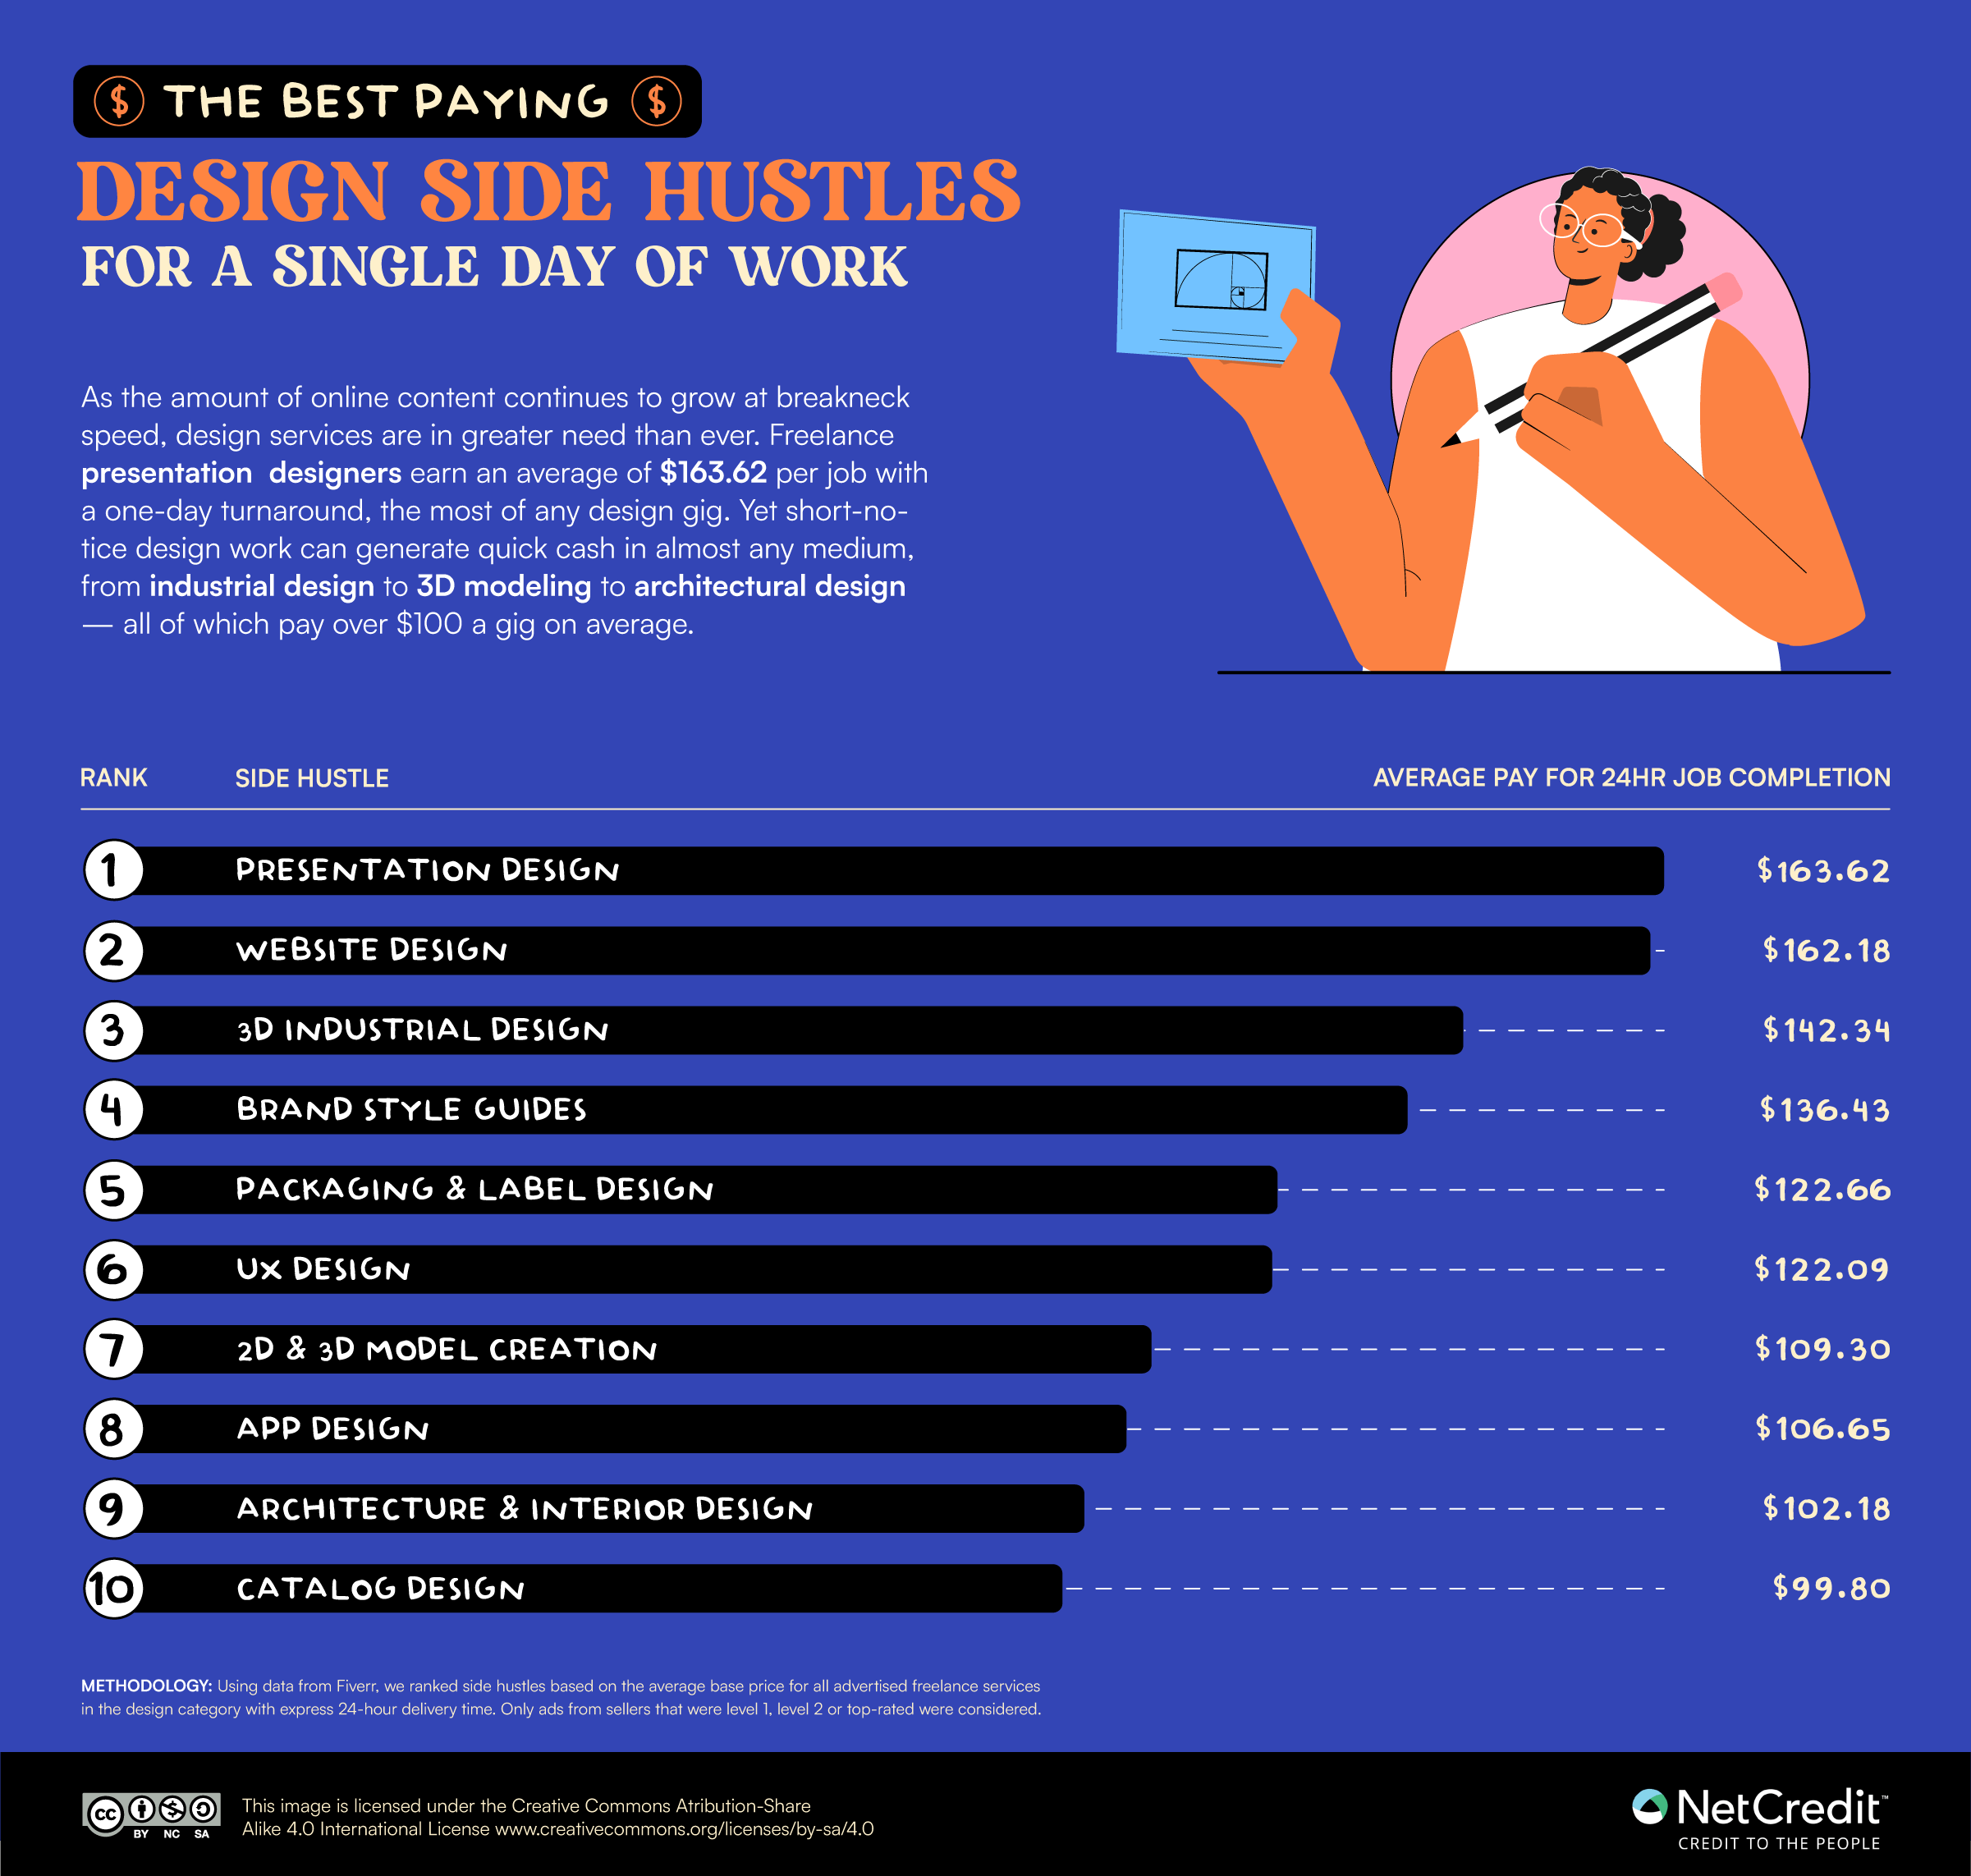 Ranking of the best paying design side hustles